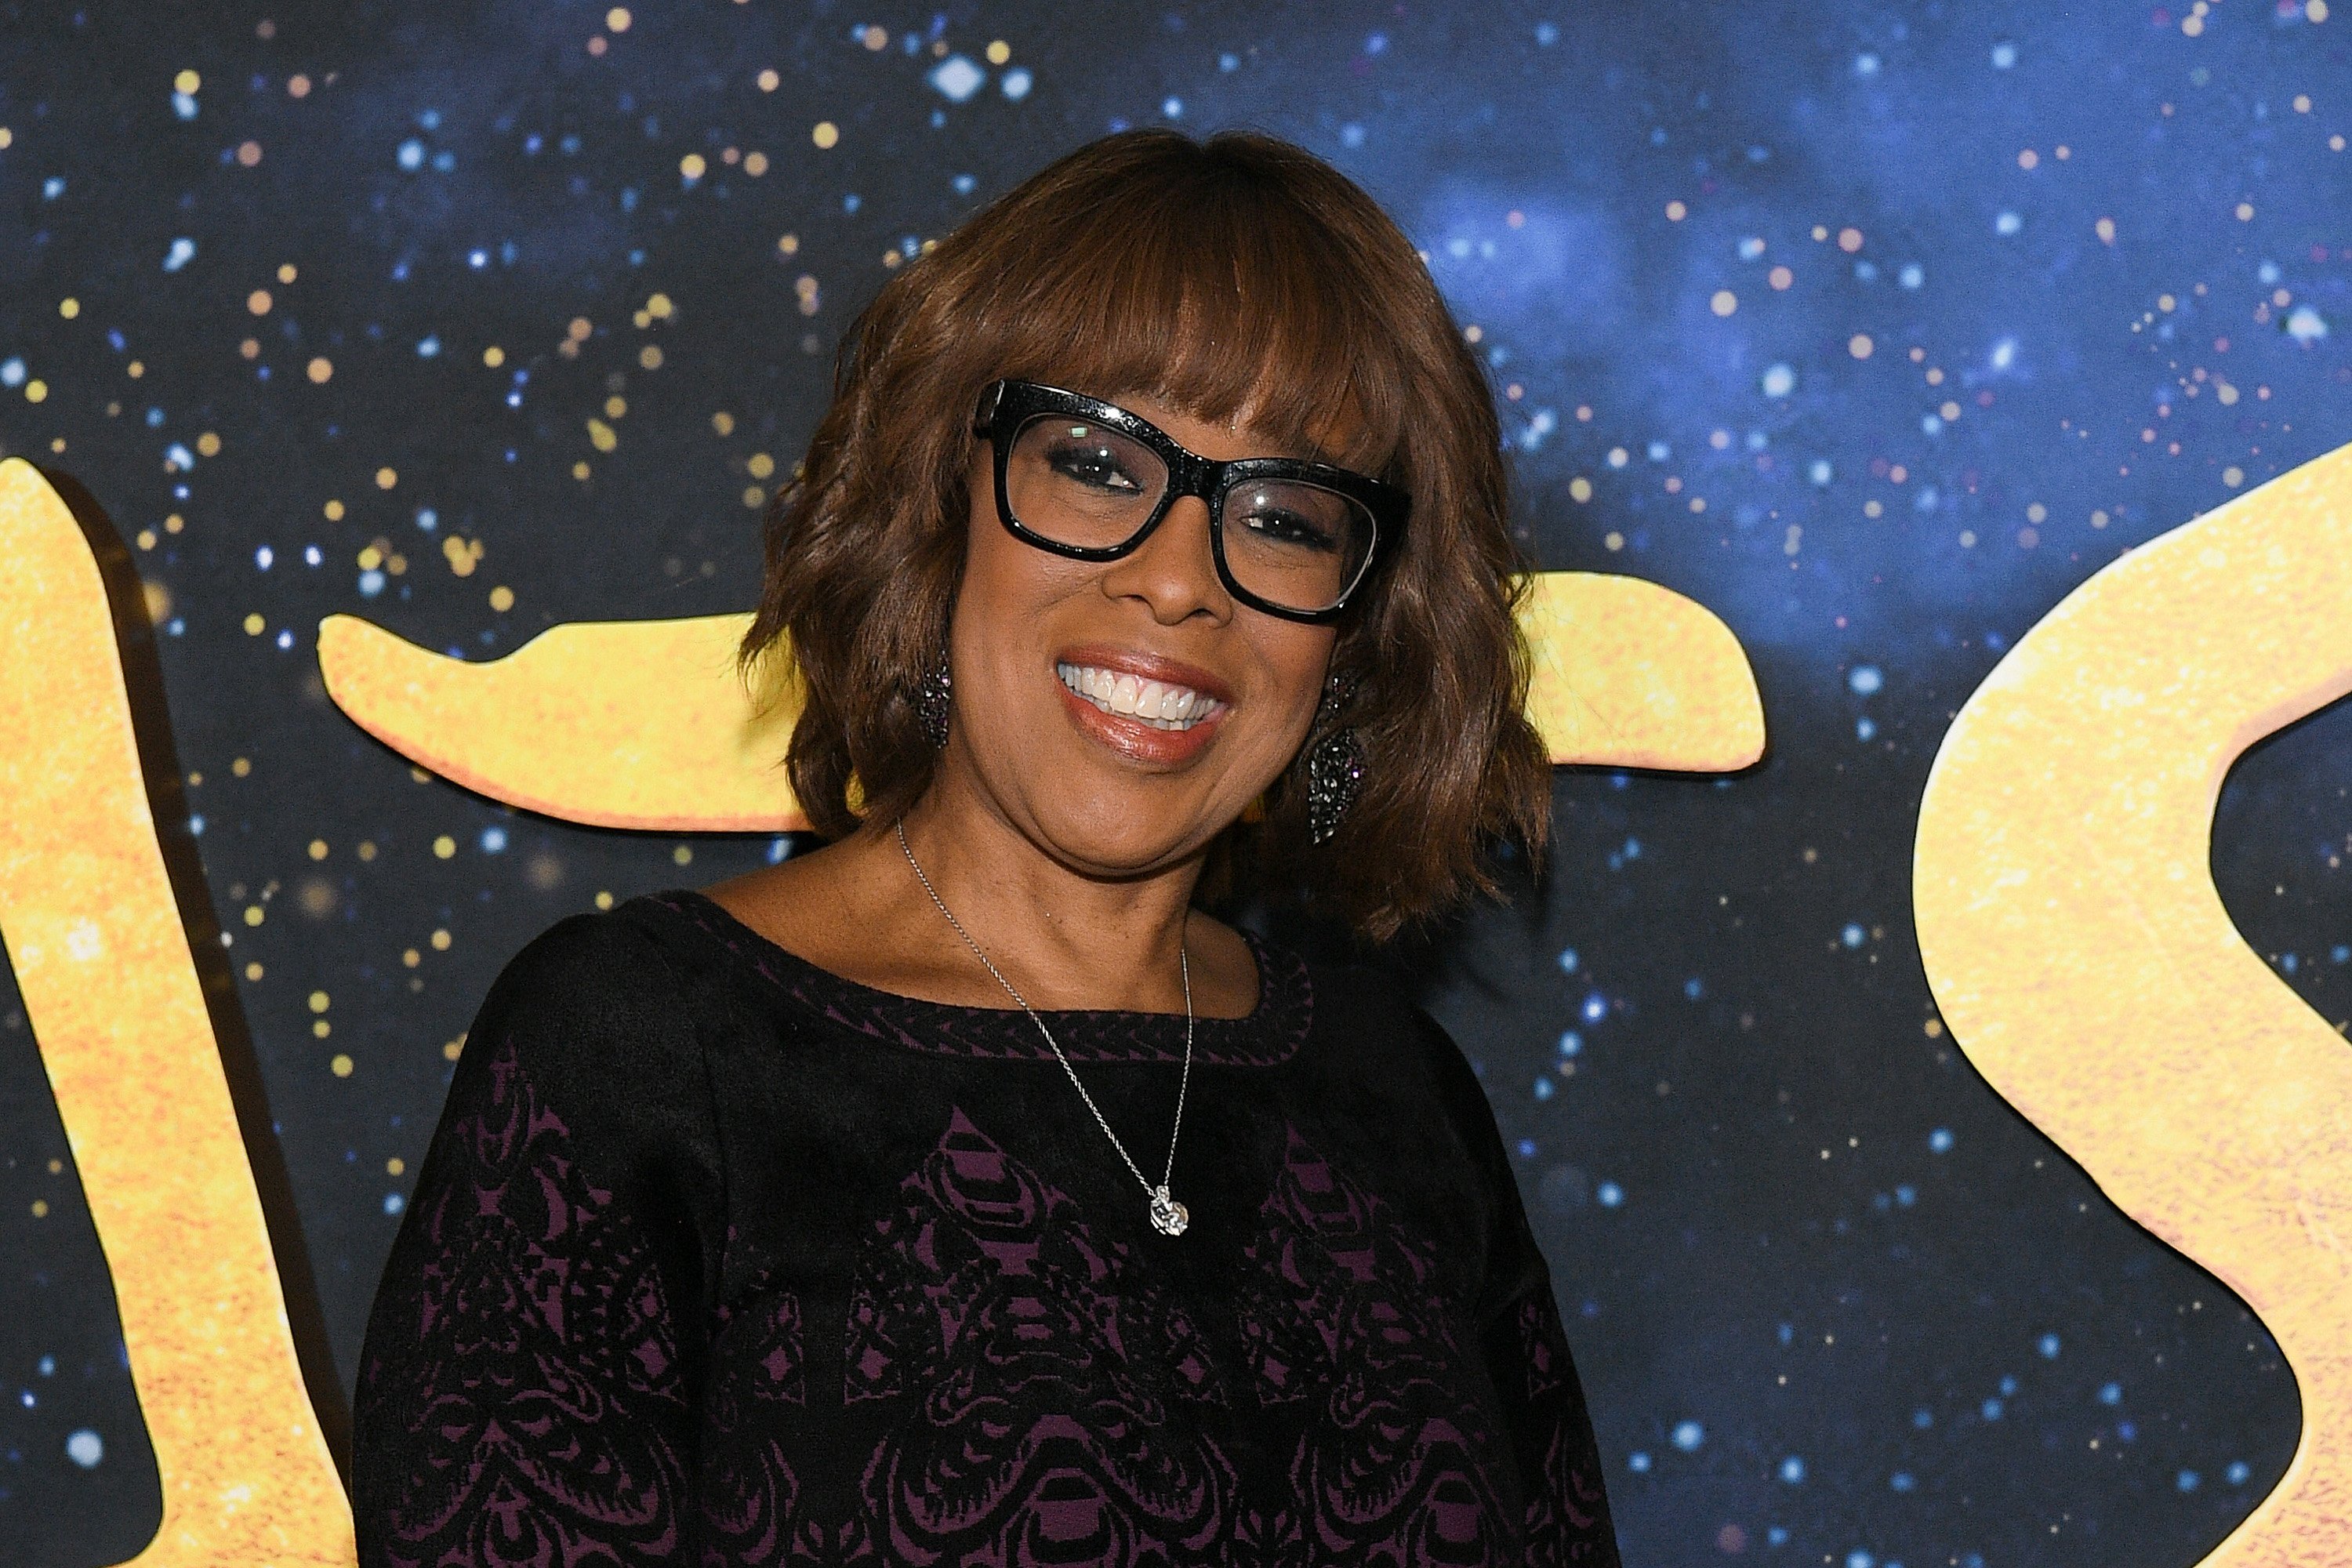 Gayle King attends the world premiere of "Cats" at Alice Tully Hall, Lincoln Center on December 16, 2019|Photo: Getty Images